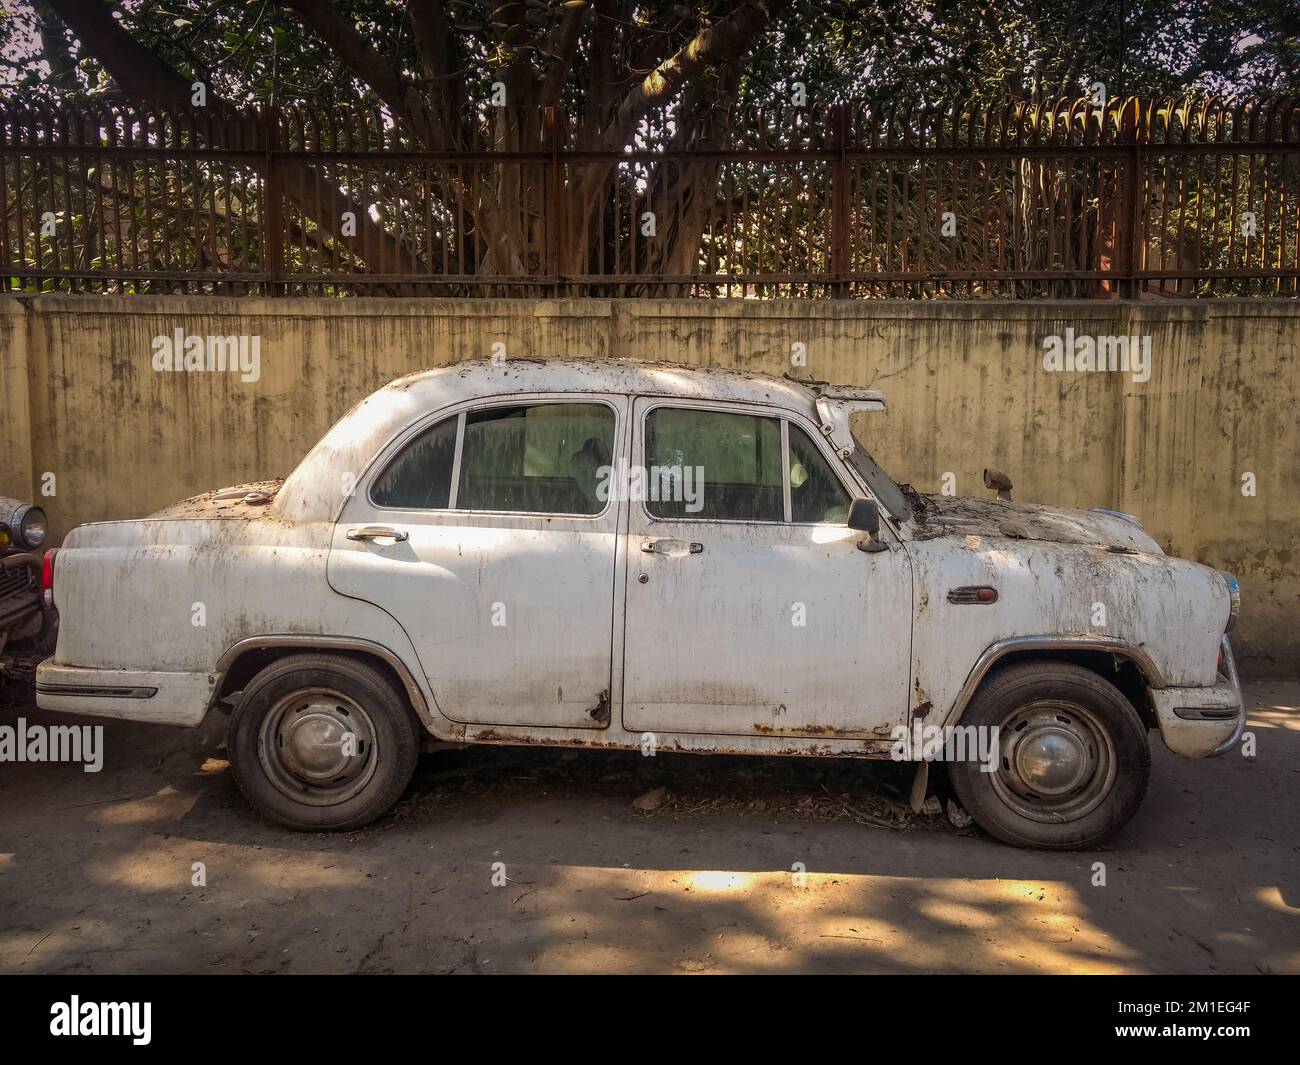 New Delhi, India - A beige vintage White Ambassador car is parked on a street Stock Photo